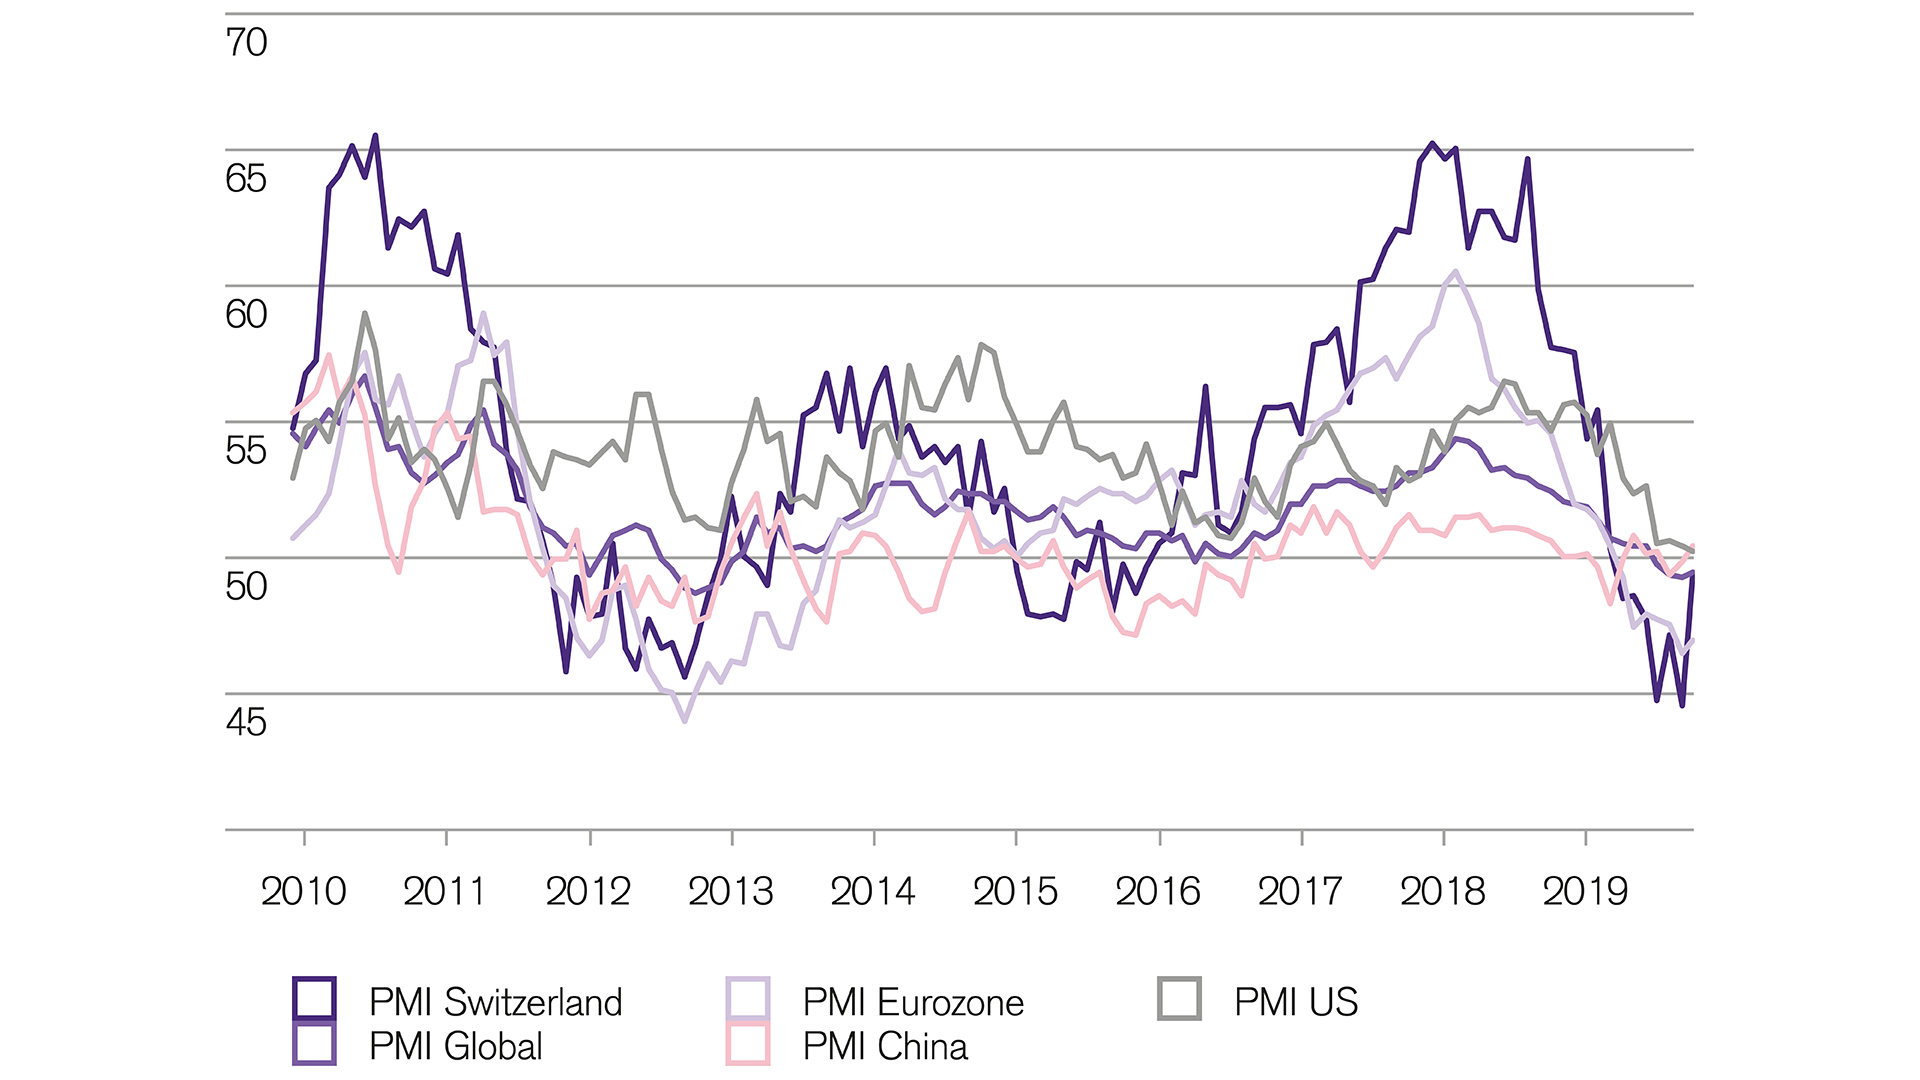 Glimmers of hope for industry equities pmis are improving worldwide